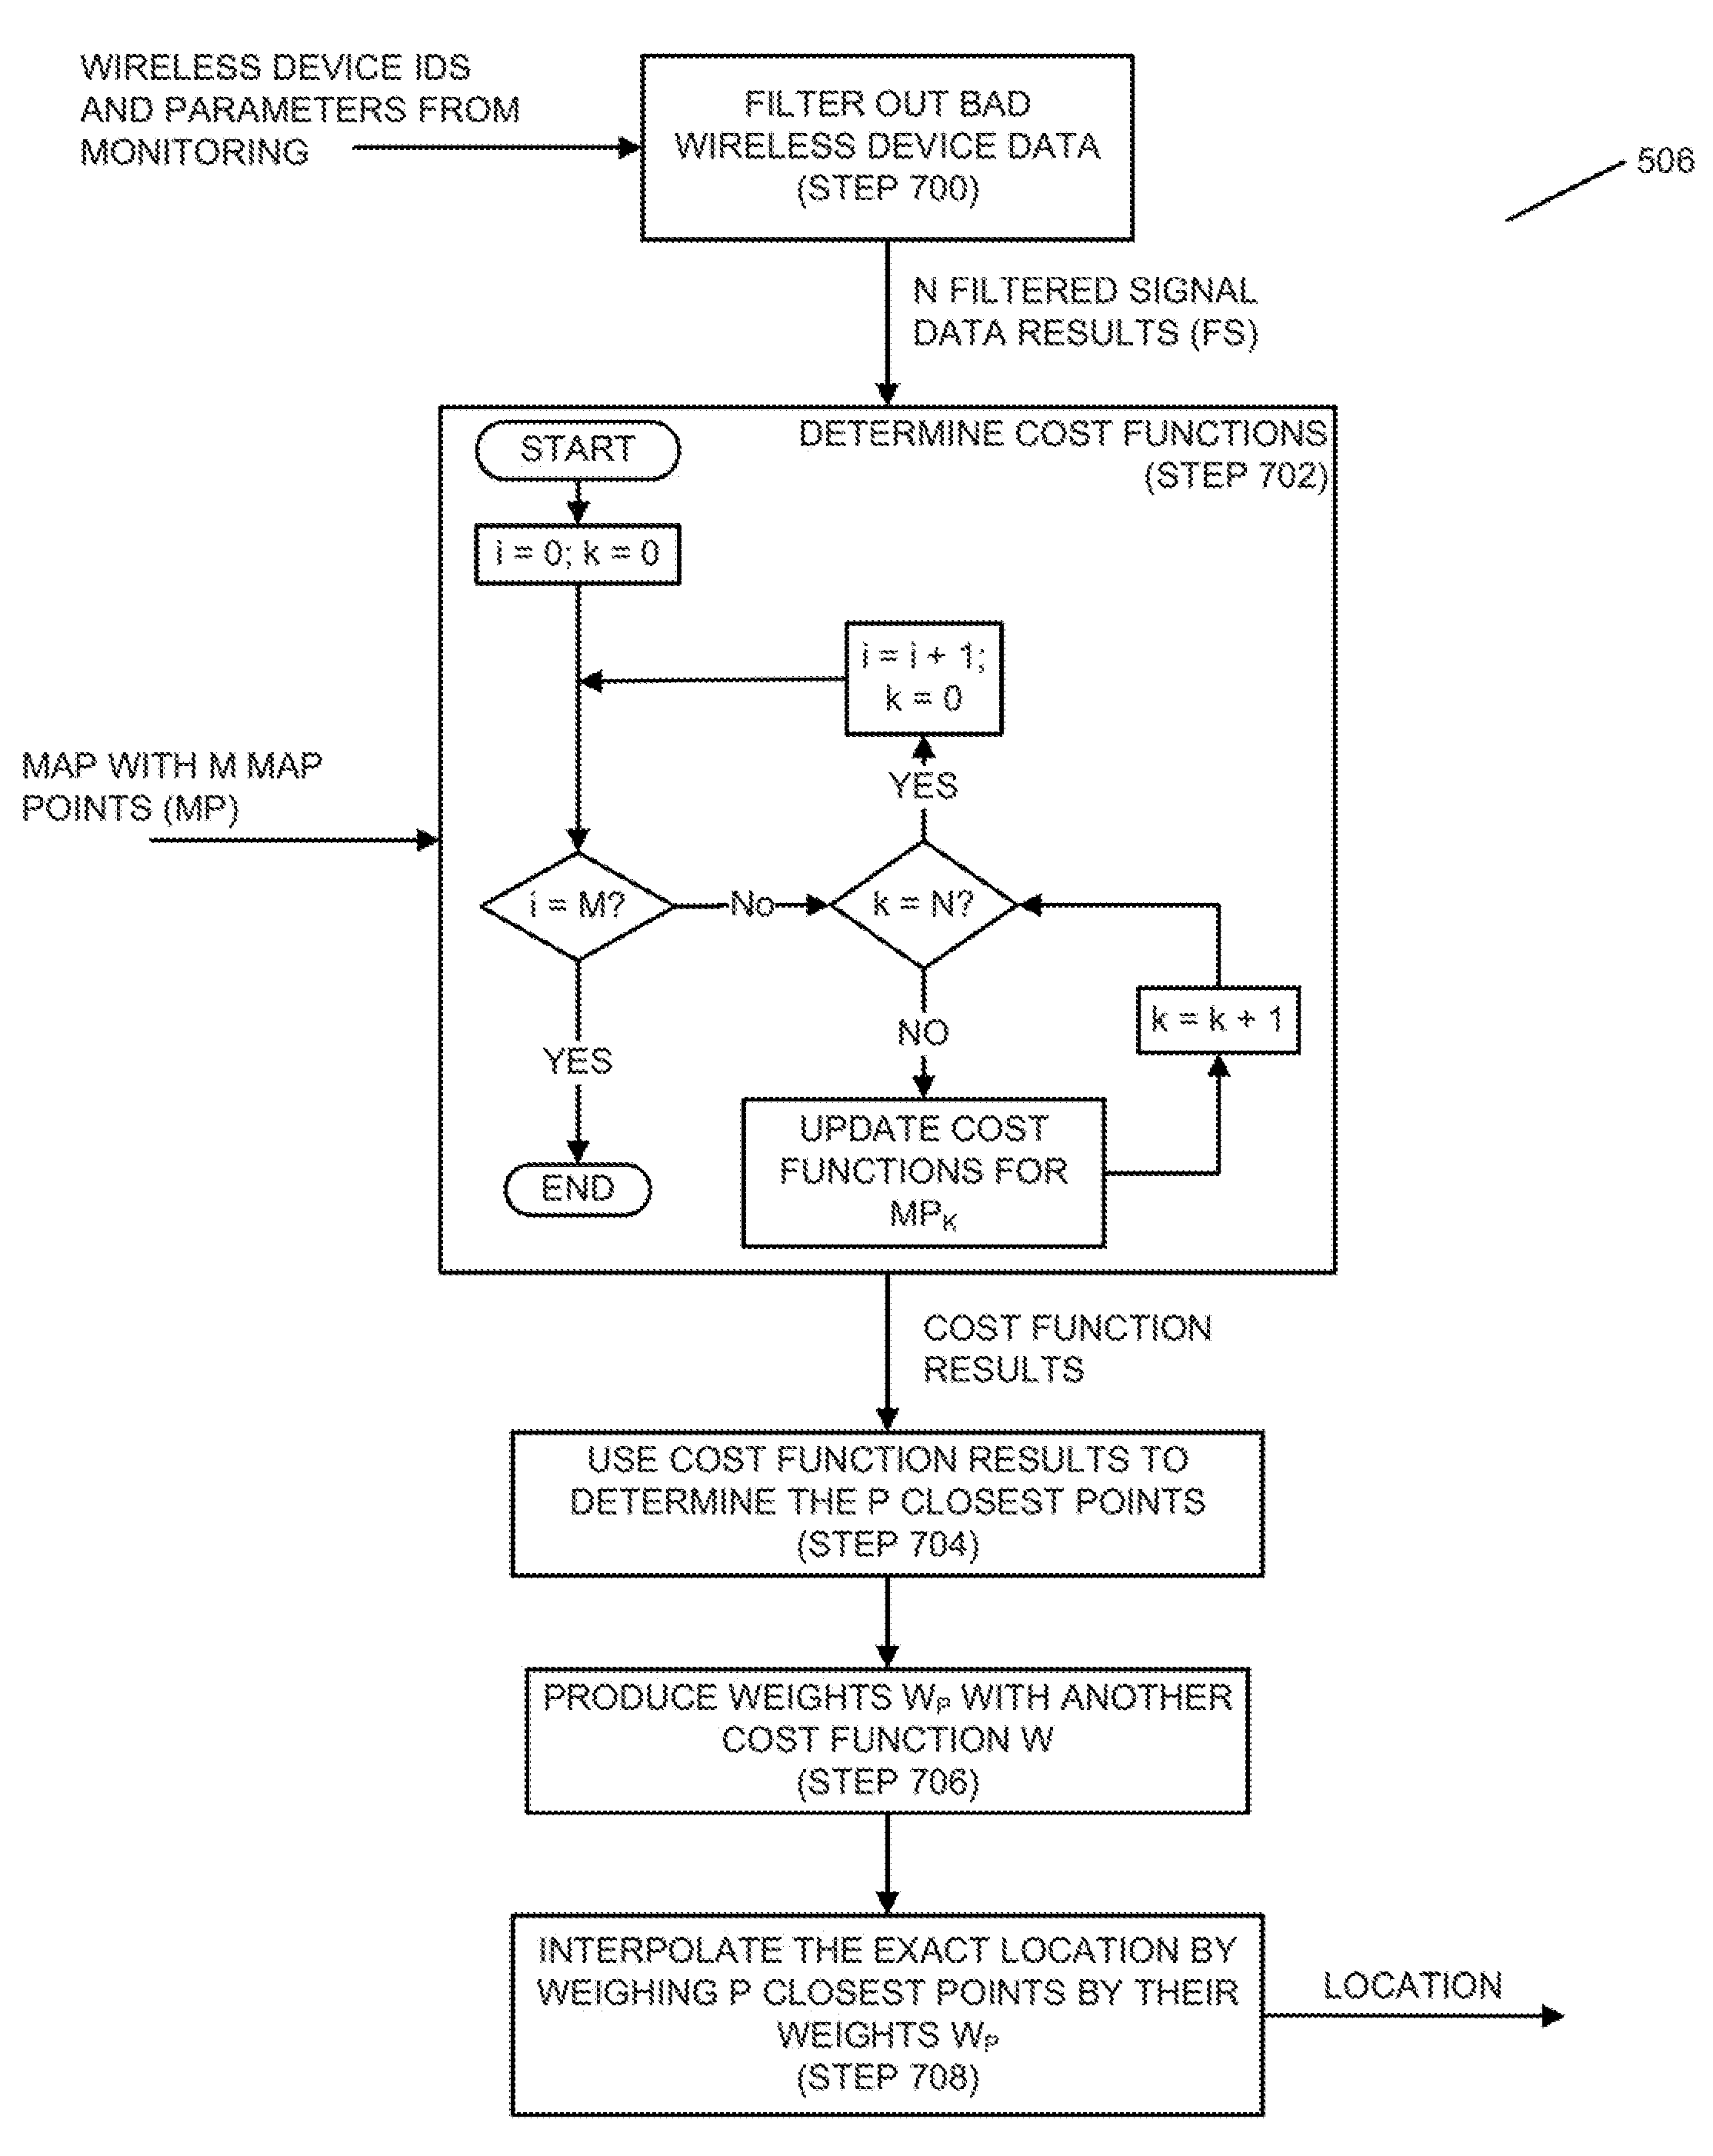 Systems and methods for indoor geolocation based on yield of RF signals